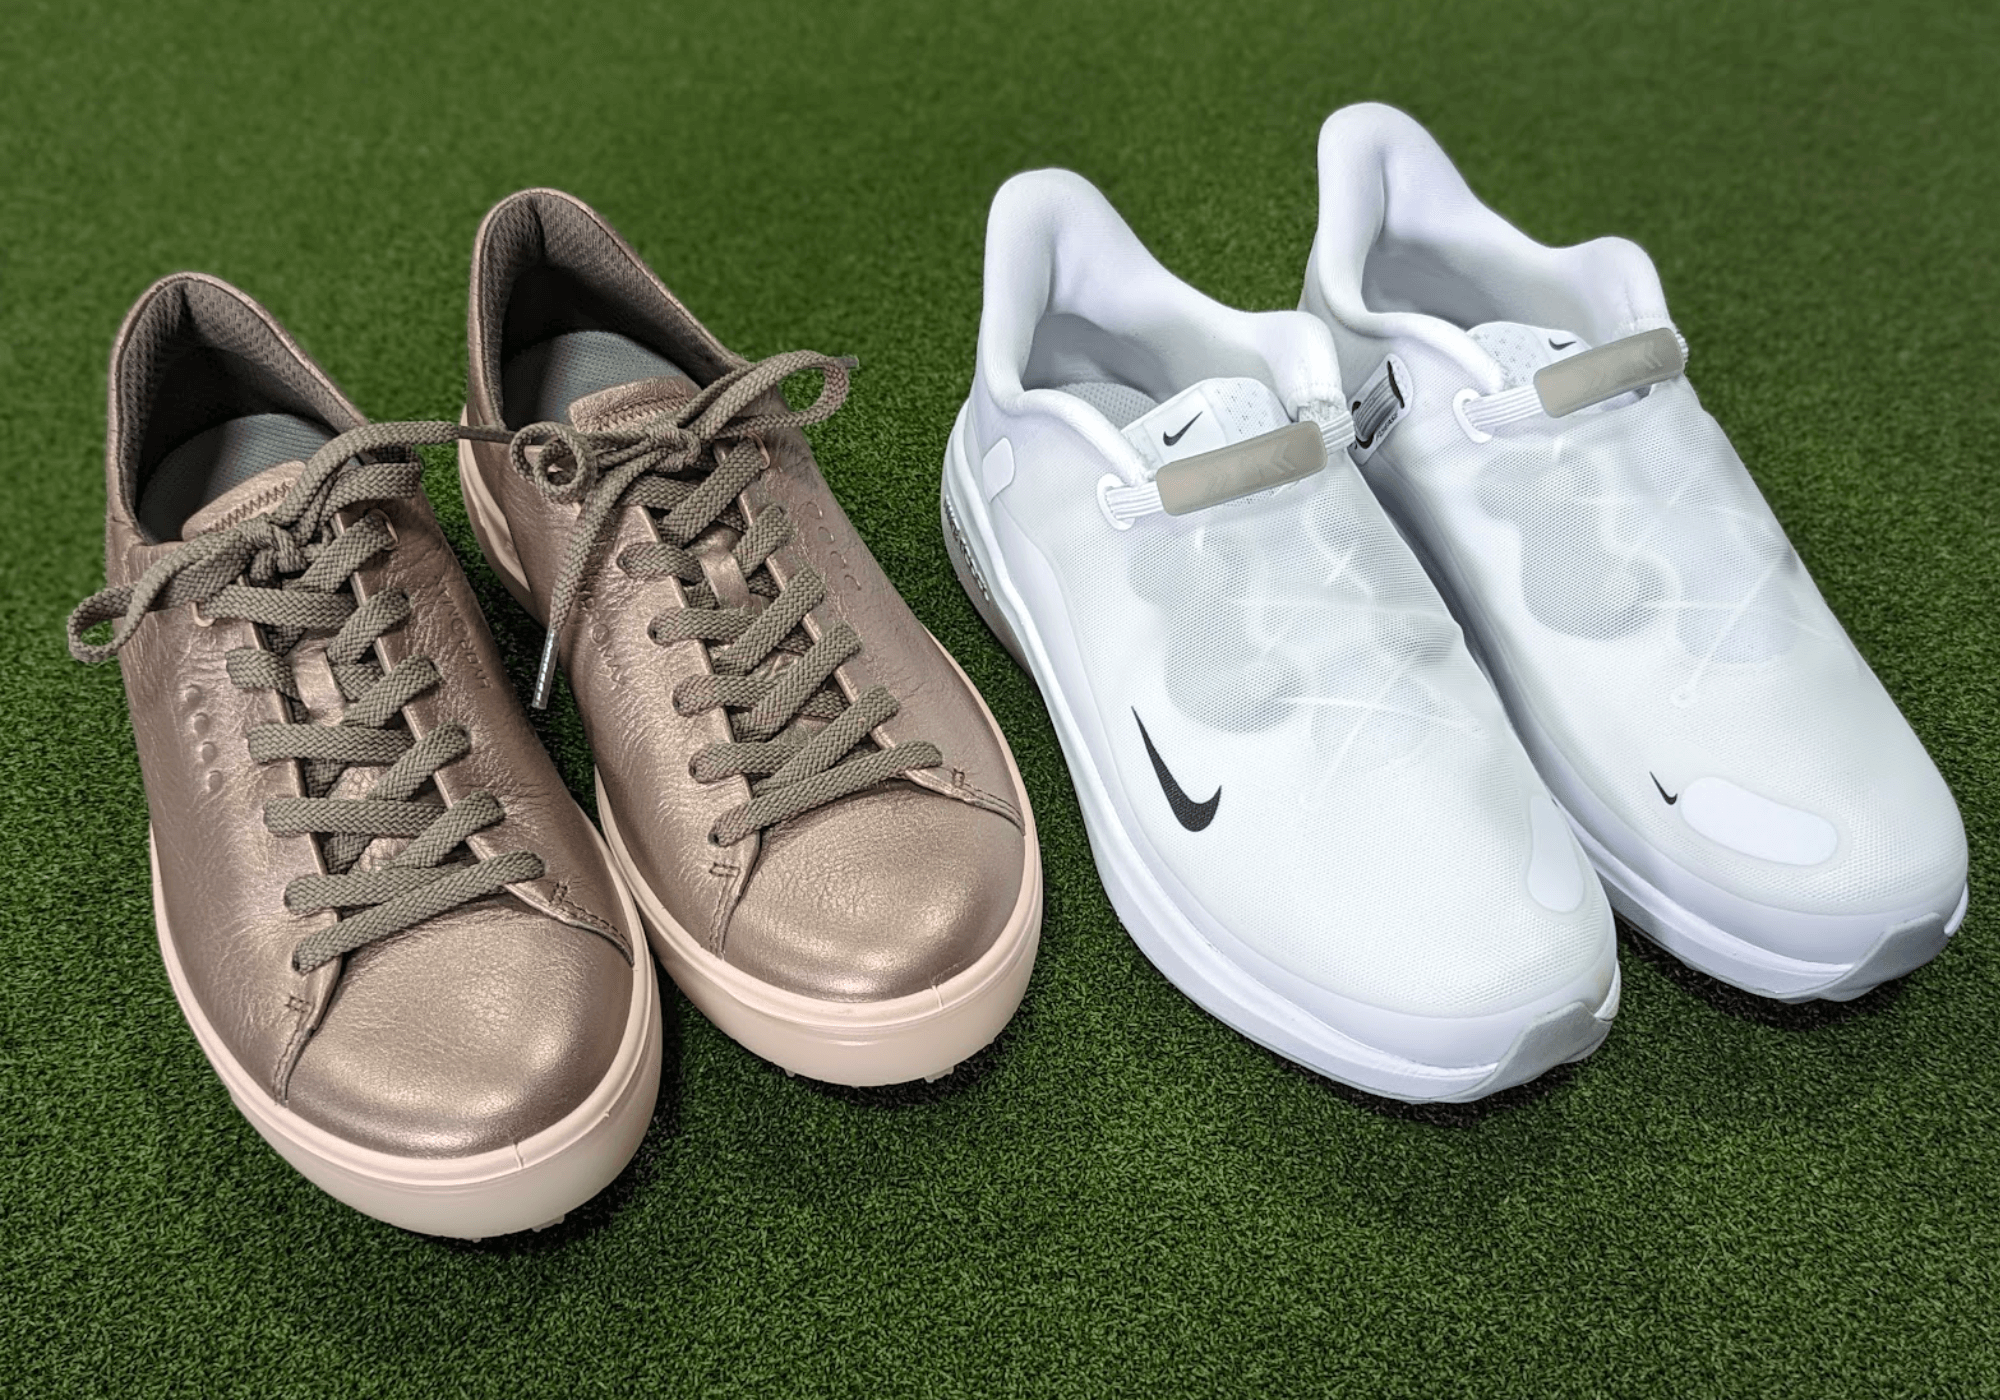 NIKE and ECCO both make good women's spikeless golf shoes.